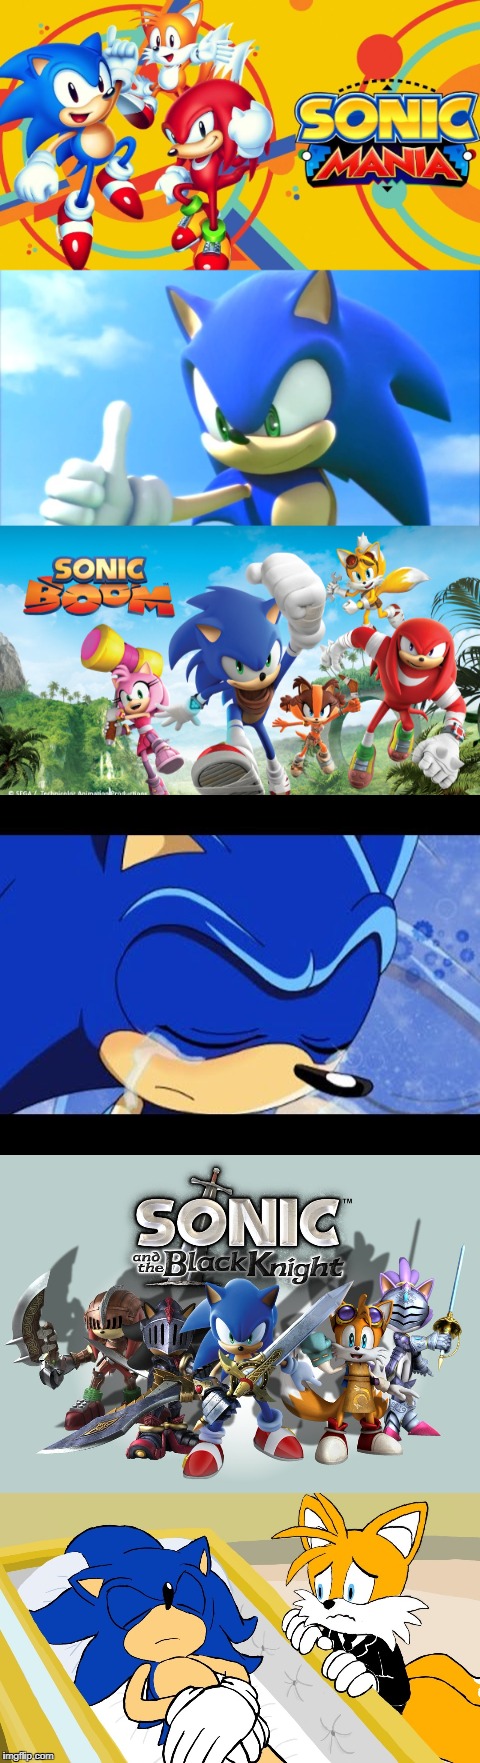 image tagged in memes,funny,sonic,sonic the hedgehog,sonic boom | made w/ Imgflip meme maker